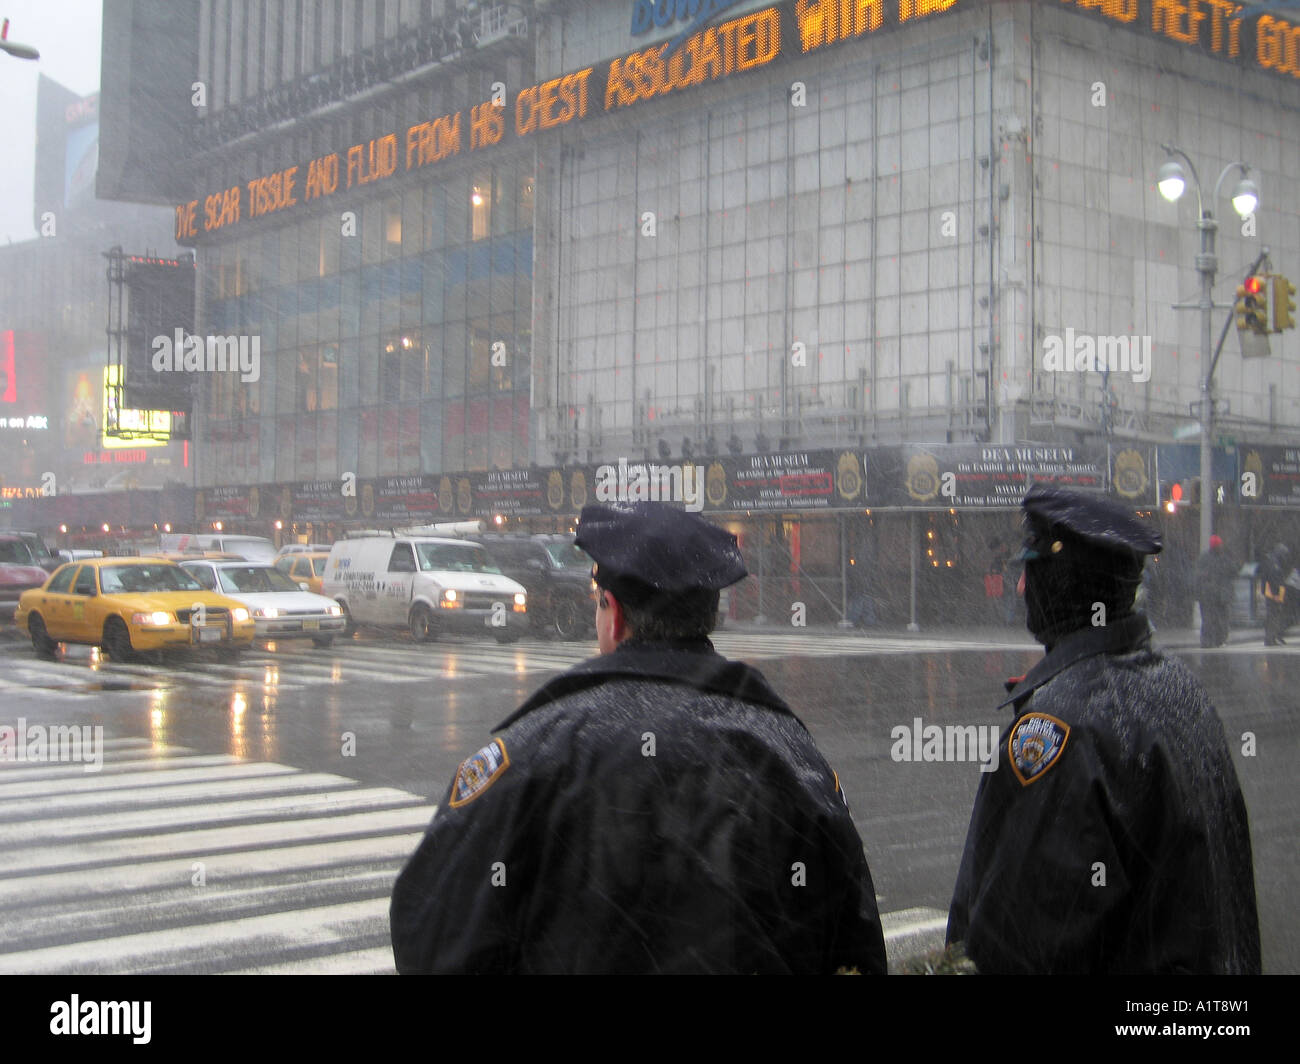 NYPD in front of Times Square buidling, snow falling, NYC Stock Photo